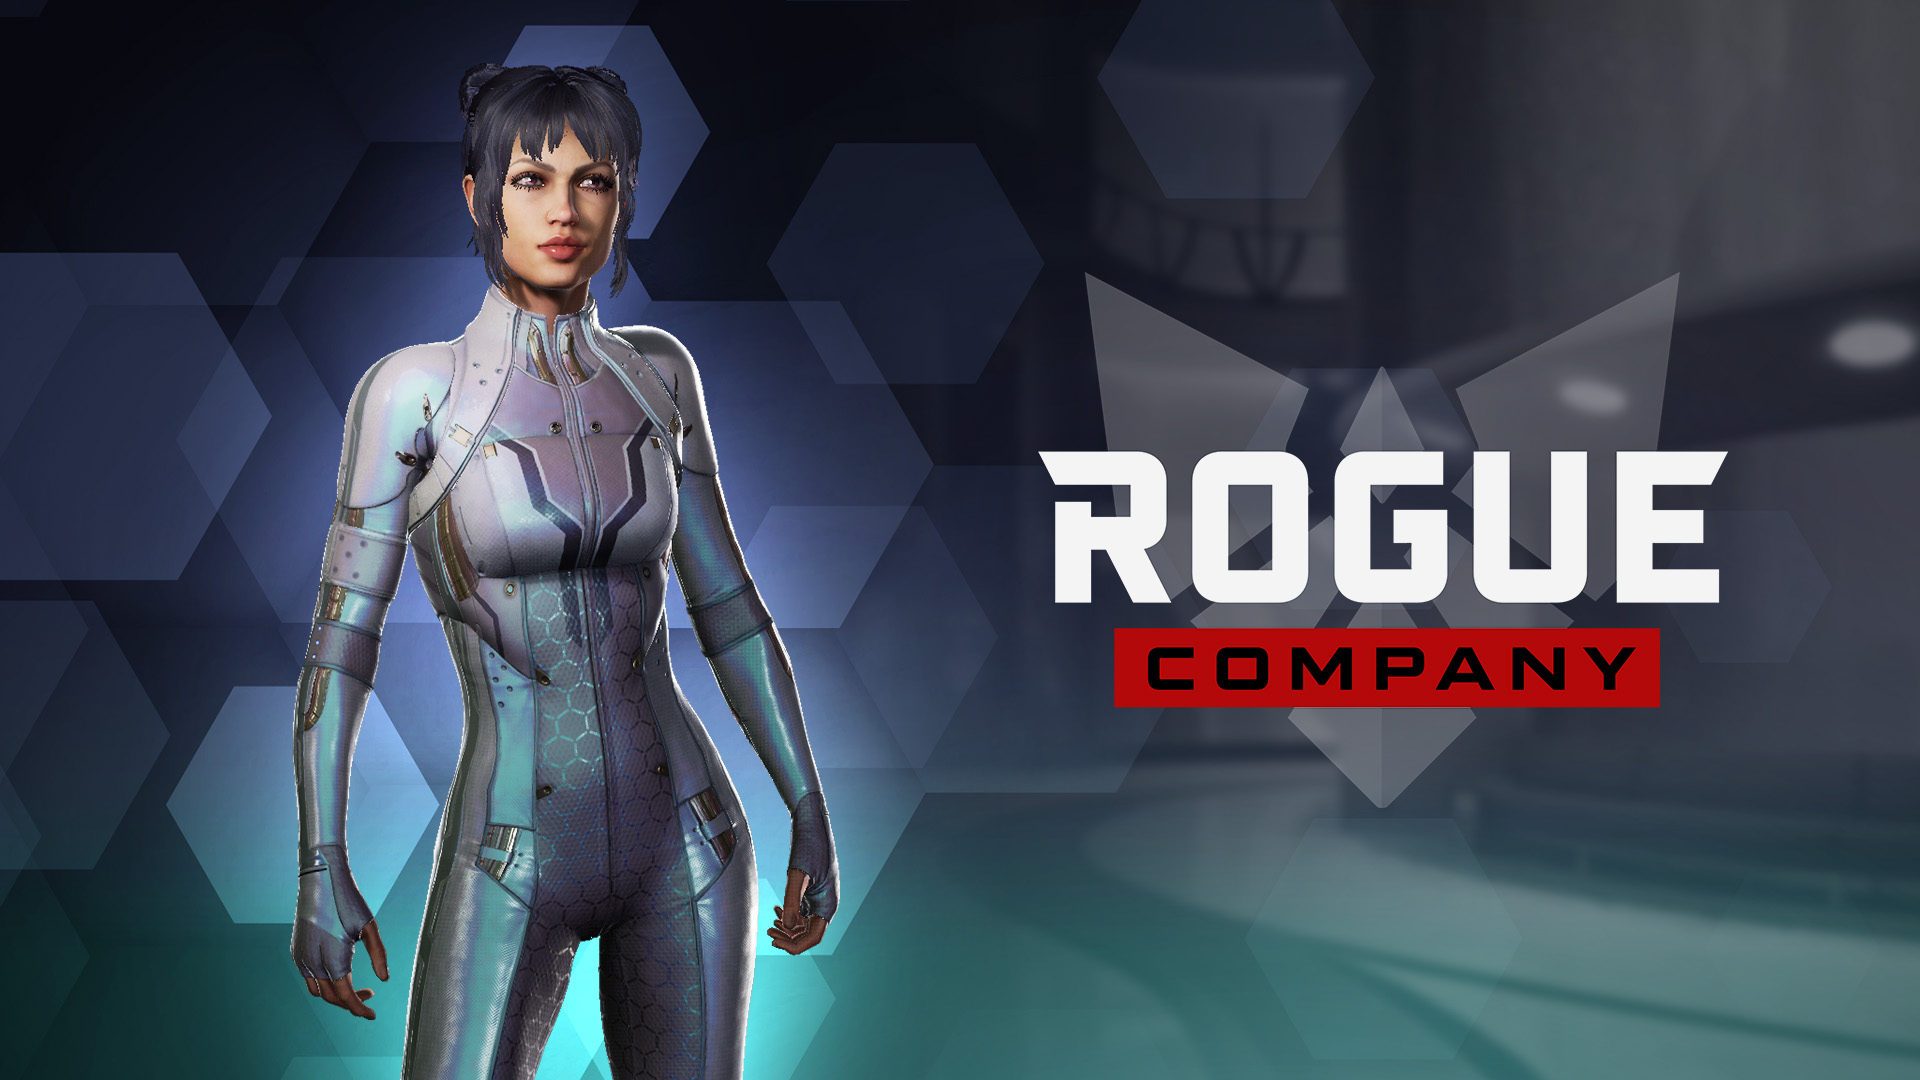 How long is Rogue Company?